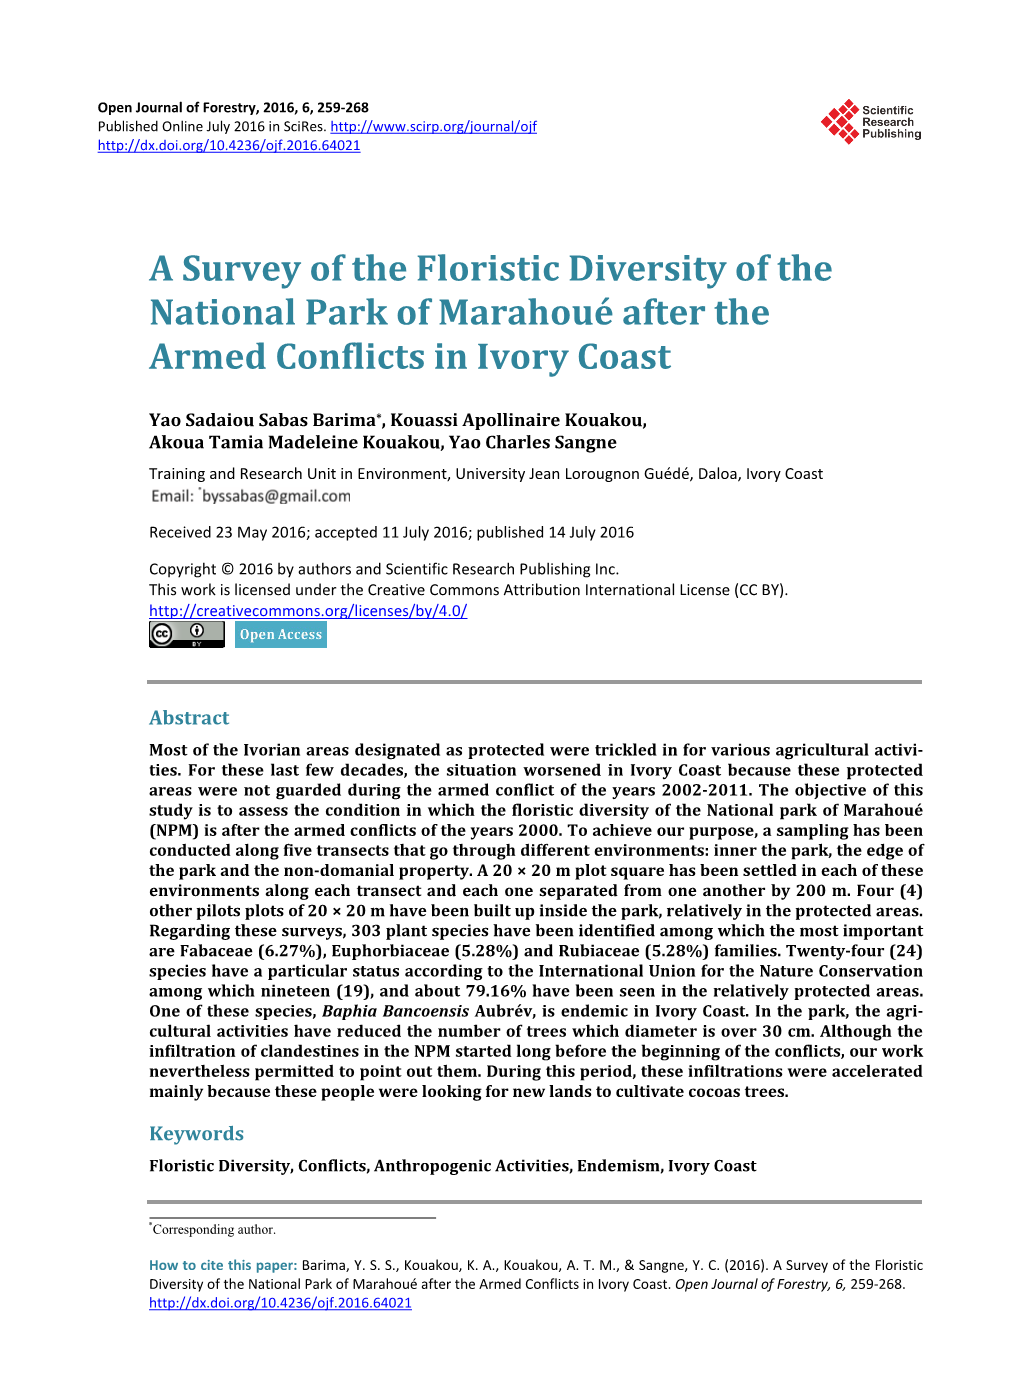 A Survey of the Floristic Diversity of the National Park of Marahoué After the Armed Conflicts in Ivory Coast